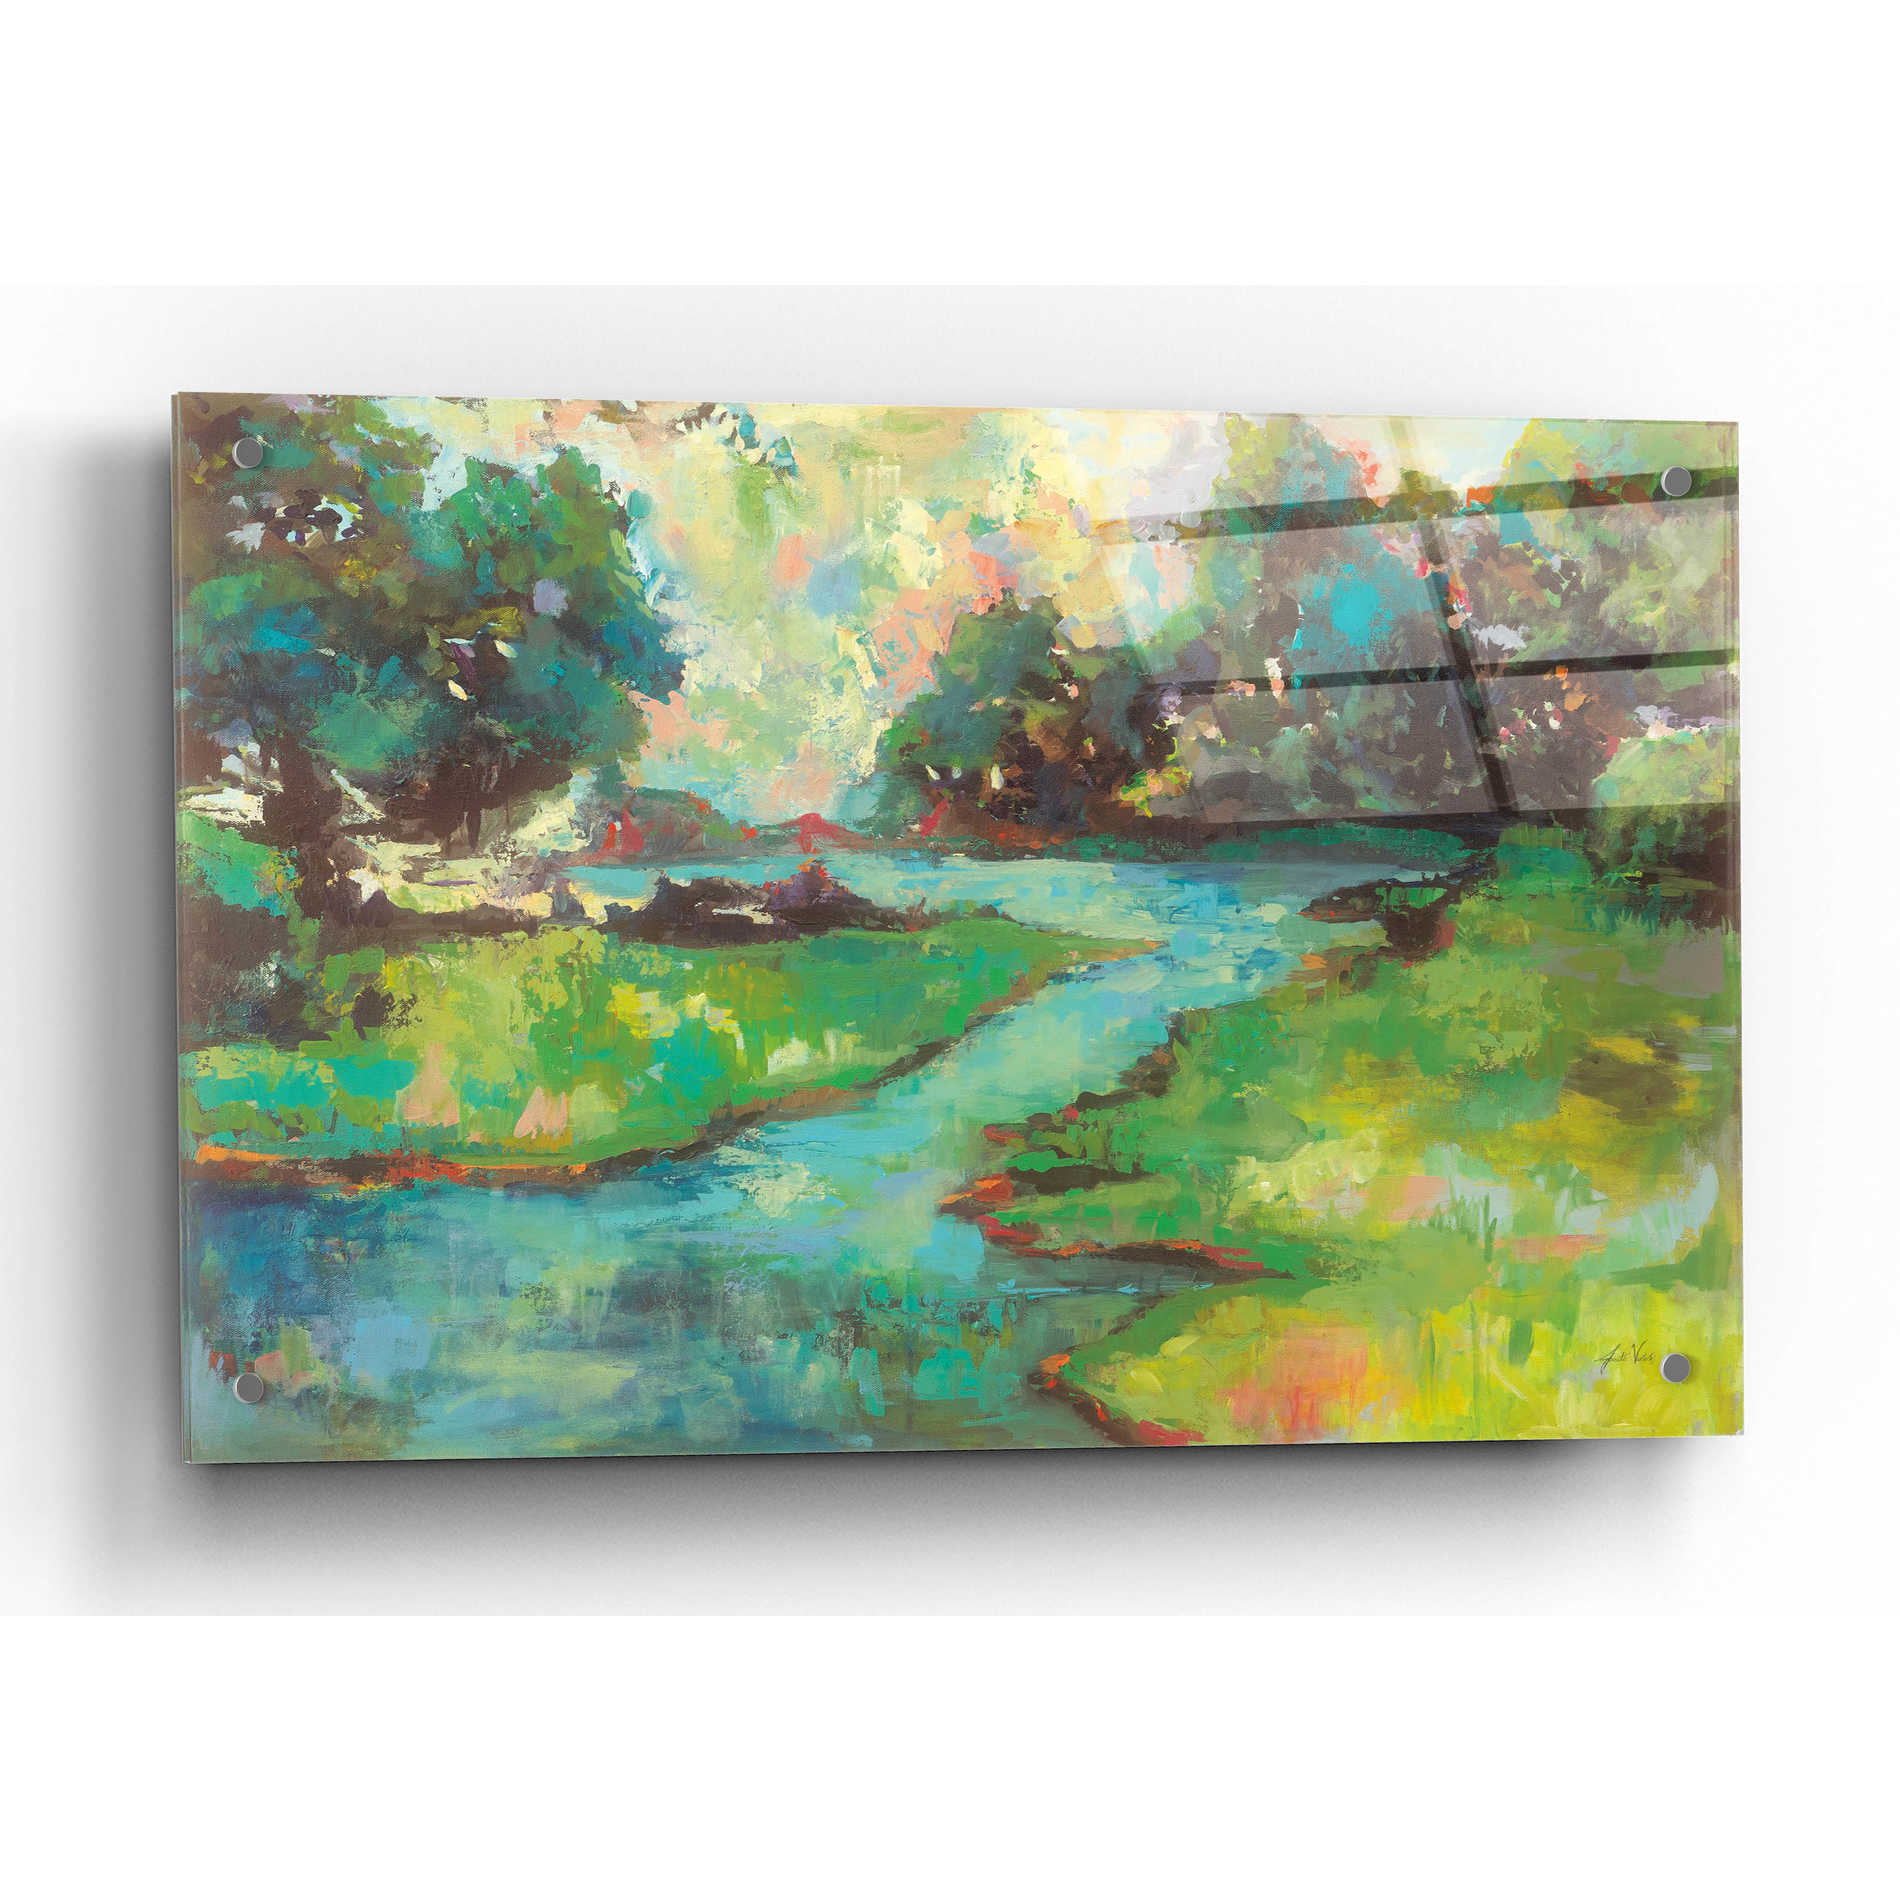 Epic Art 'Landscape in the Park' by Jeanette Vertentes, Acrylic Glass Wall Art,36x24